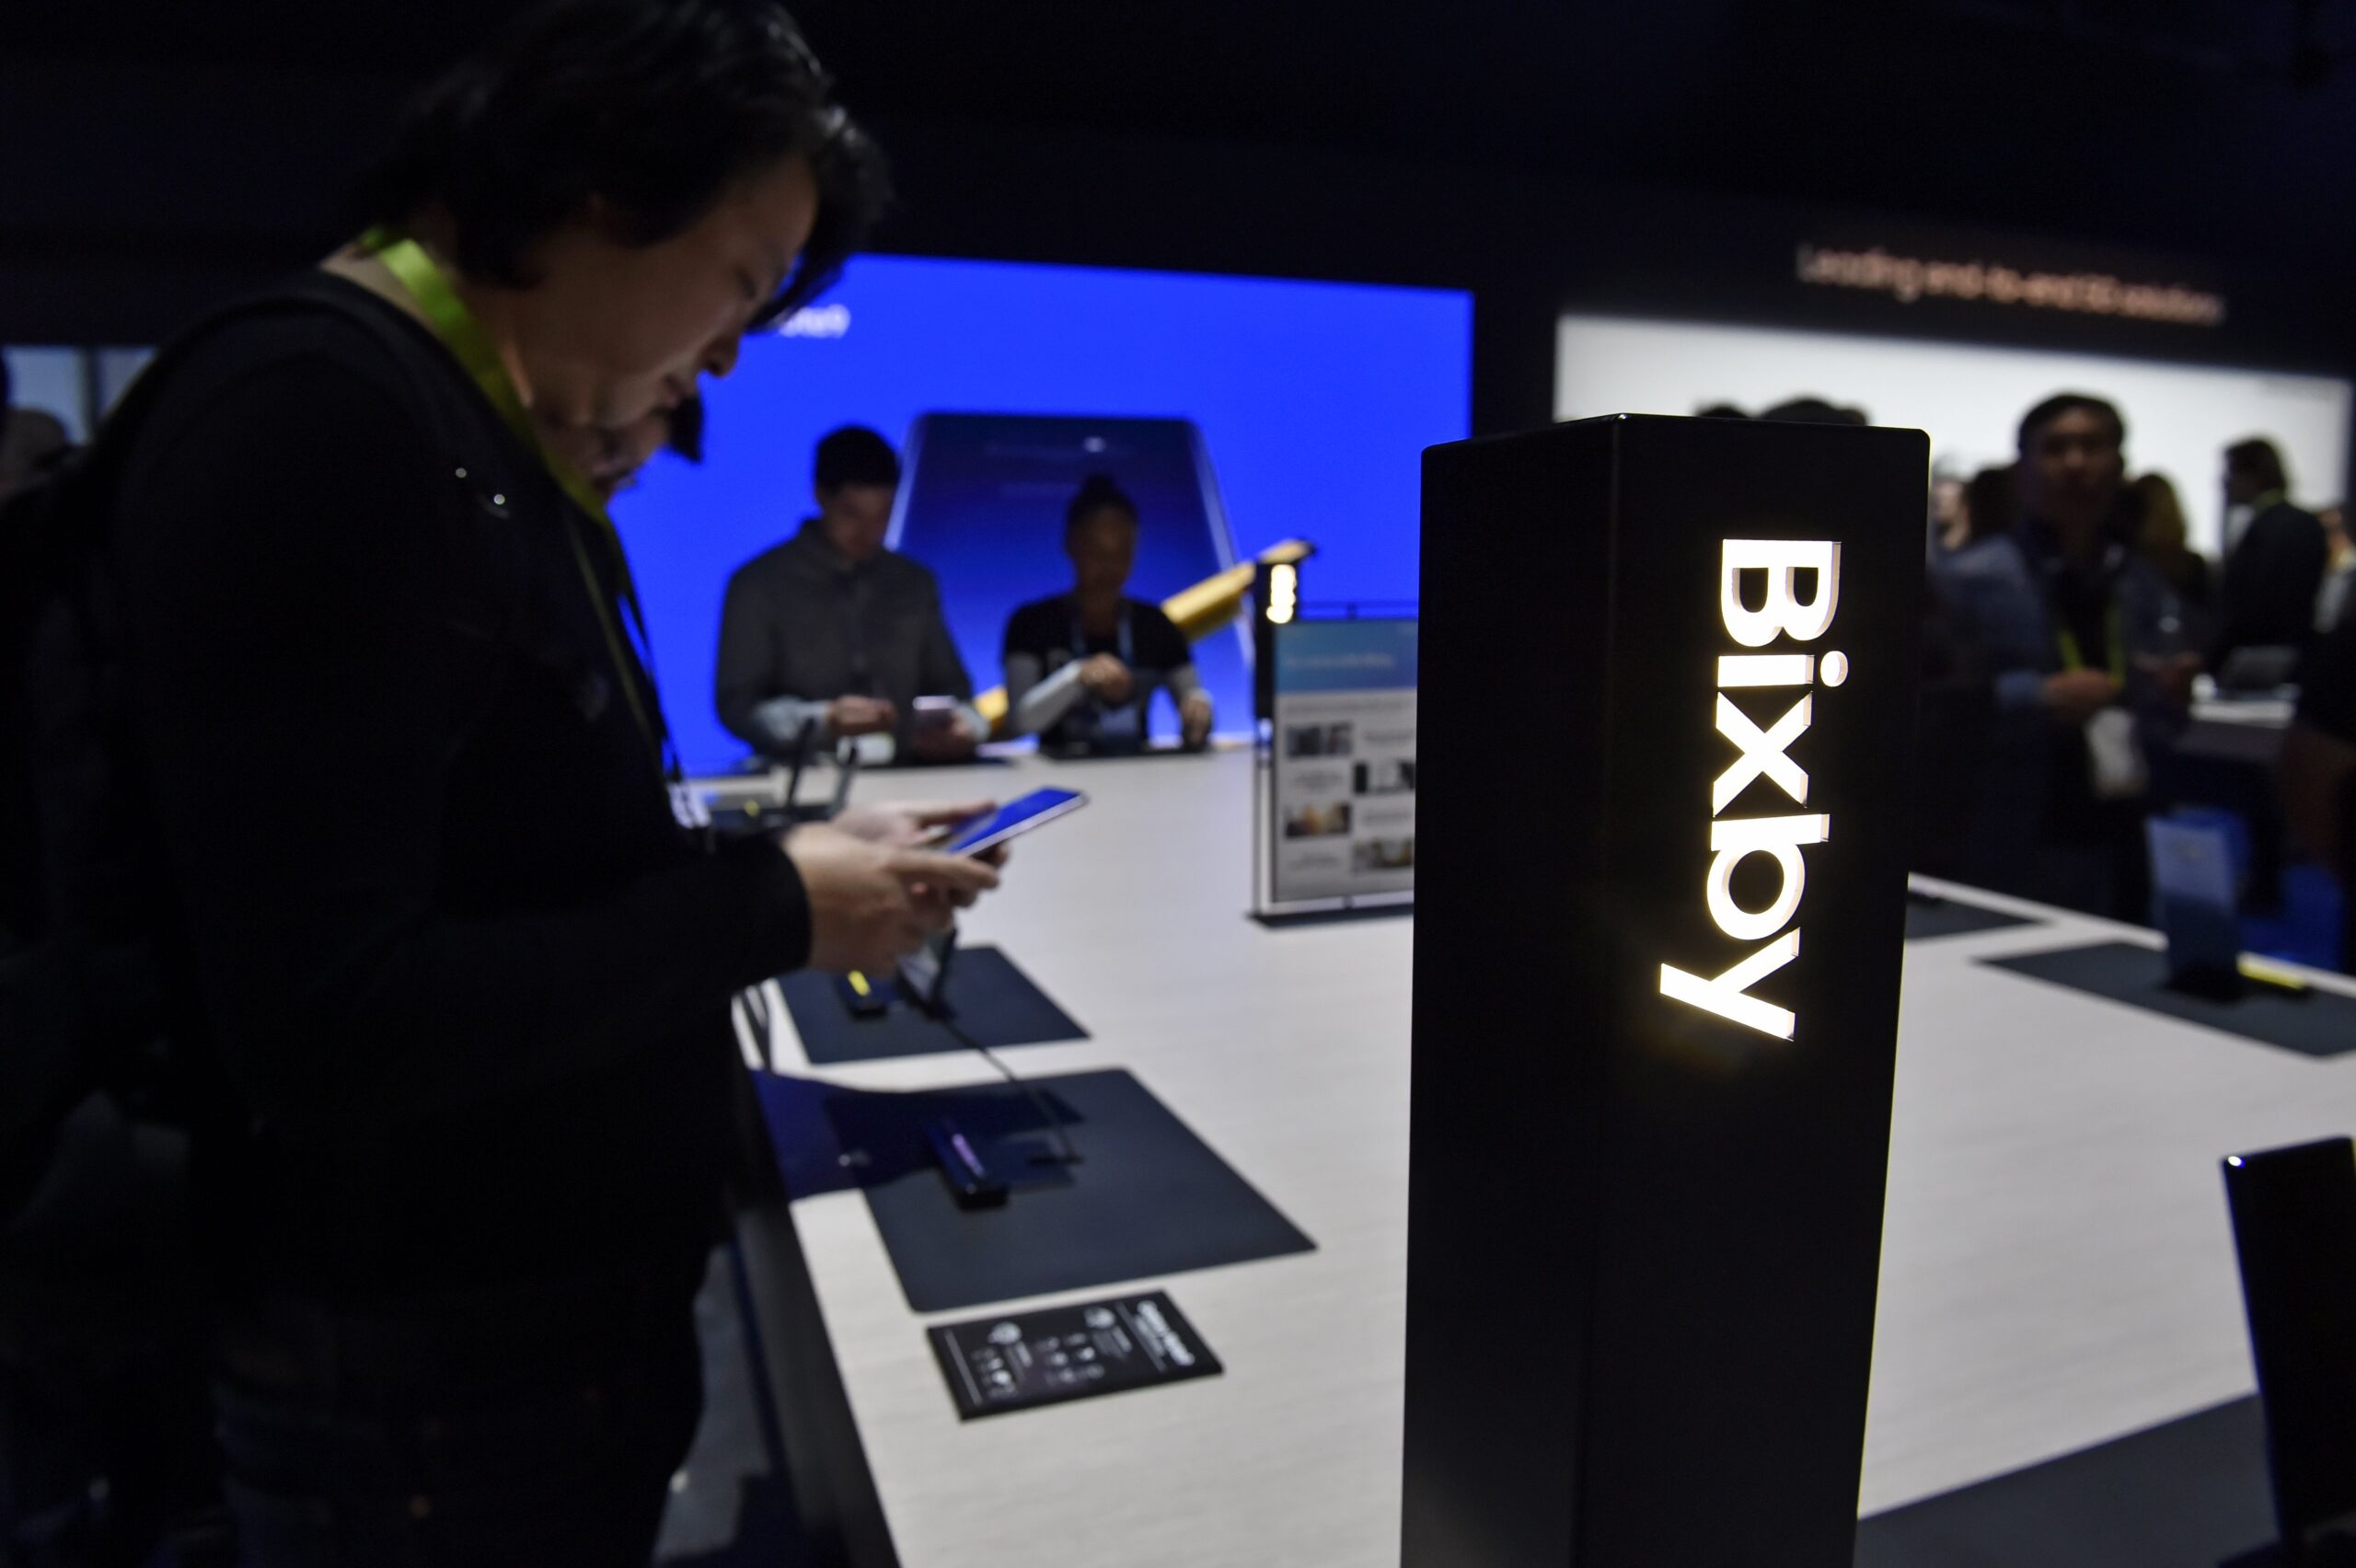 Attendees examine Bixby enabled devices at the Samsung booth during CES 2019 at the Las Vegas Convention Center